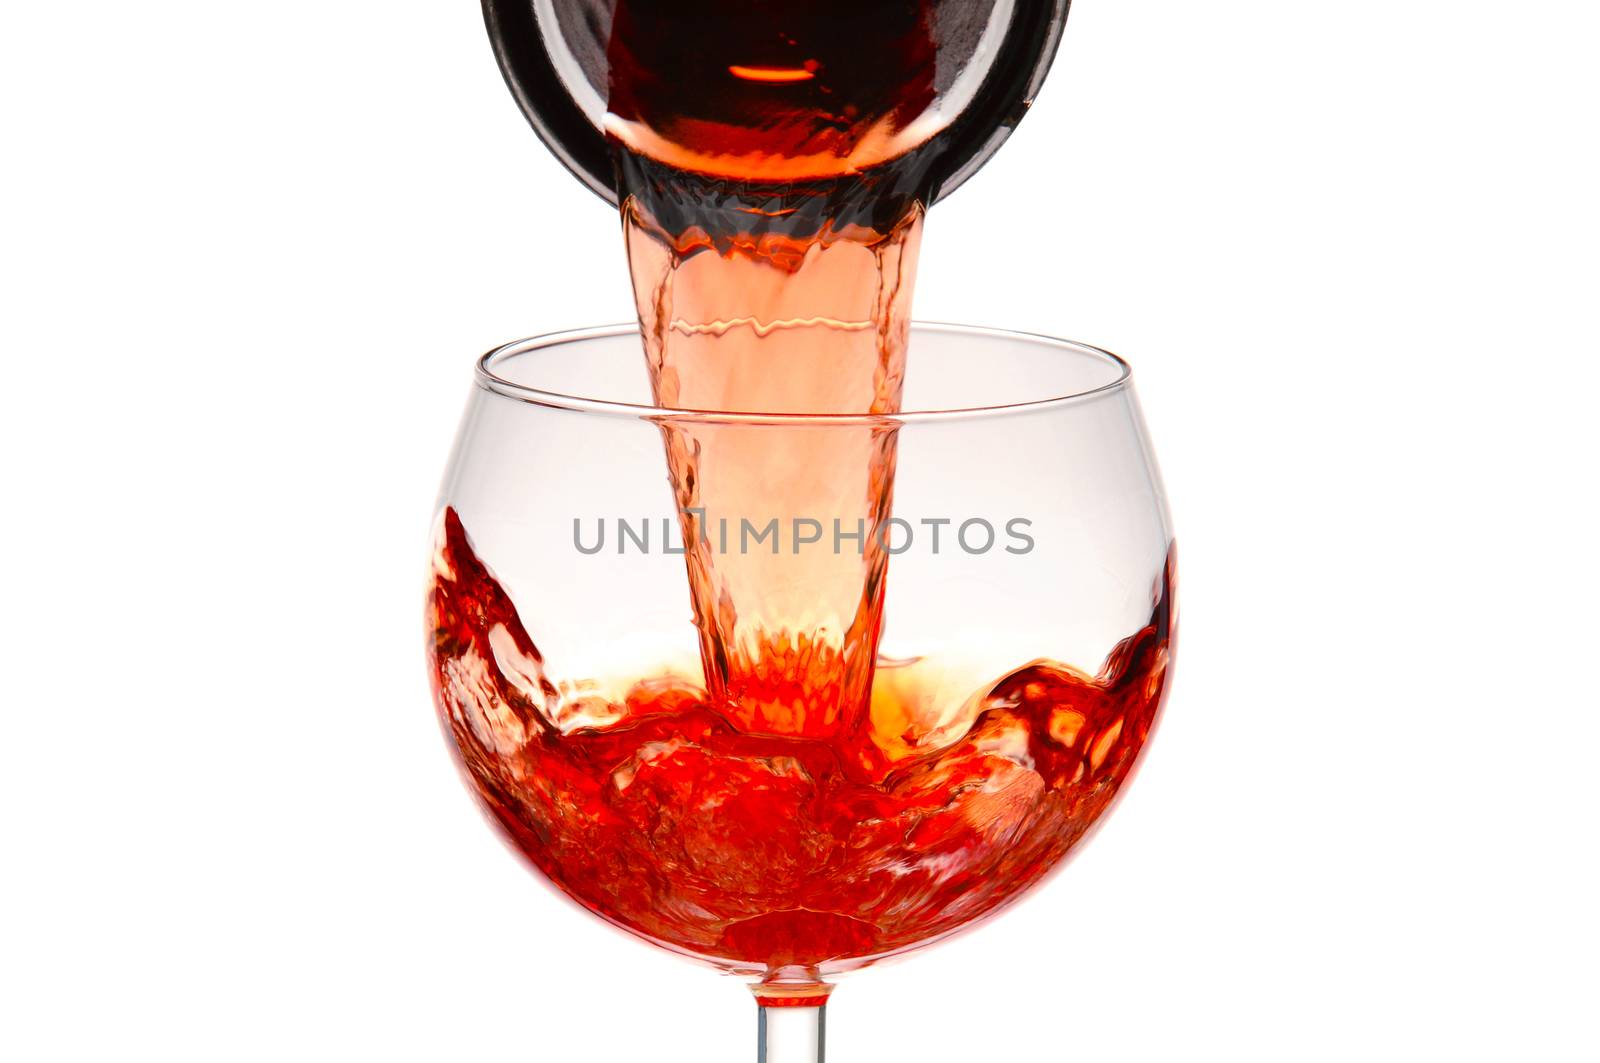 Closeup of a wineglass with red wine pouring from a carafe.